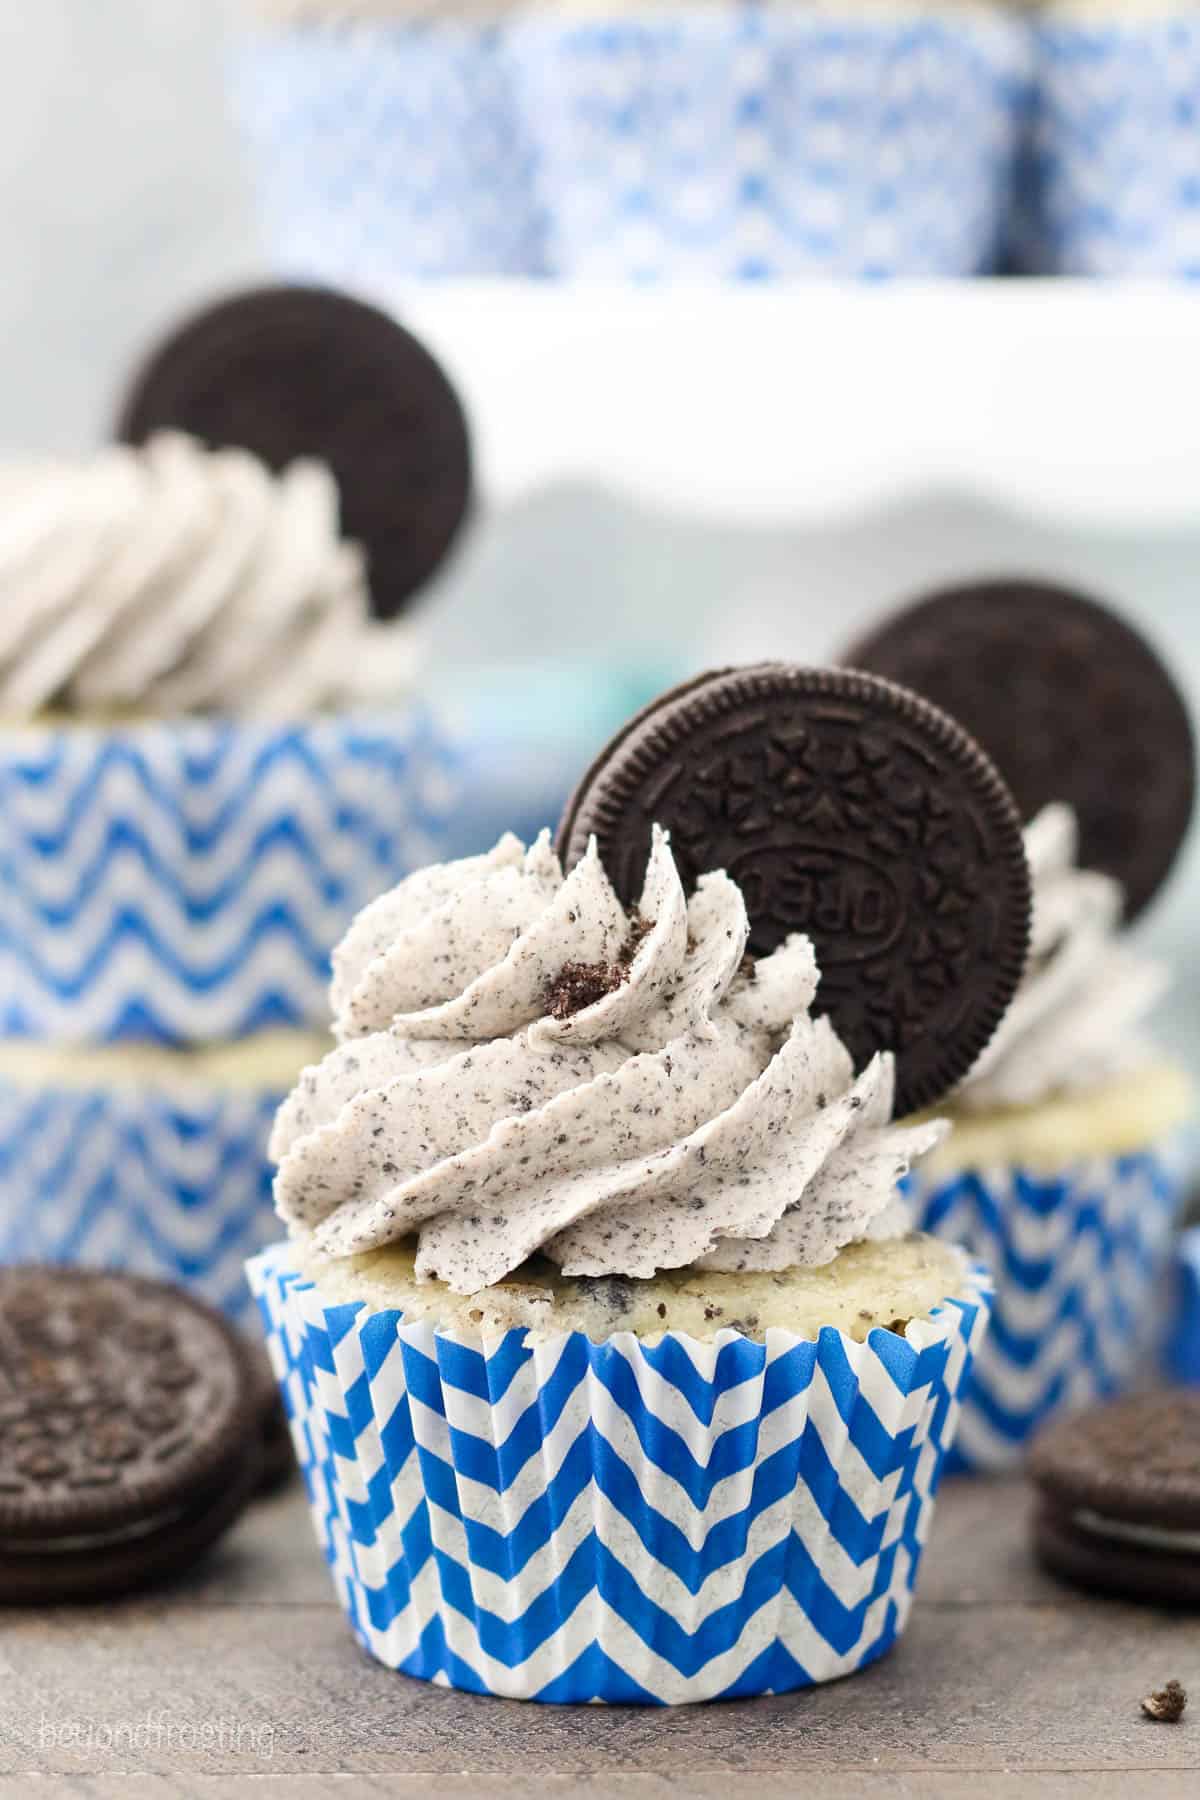 Frosted cookies and cream Oreo cupcakes in white and blue cupcake liners, garnished with whole Oreo cookies.